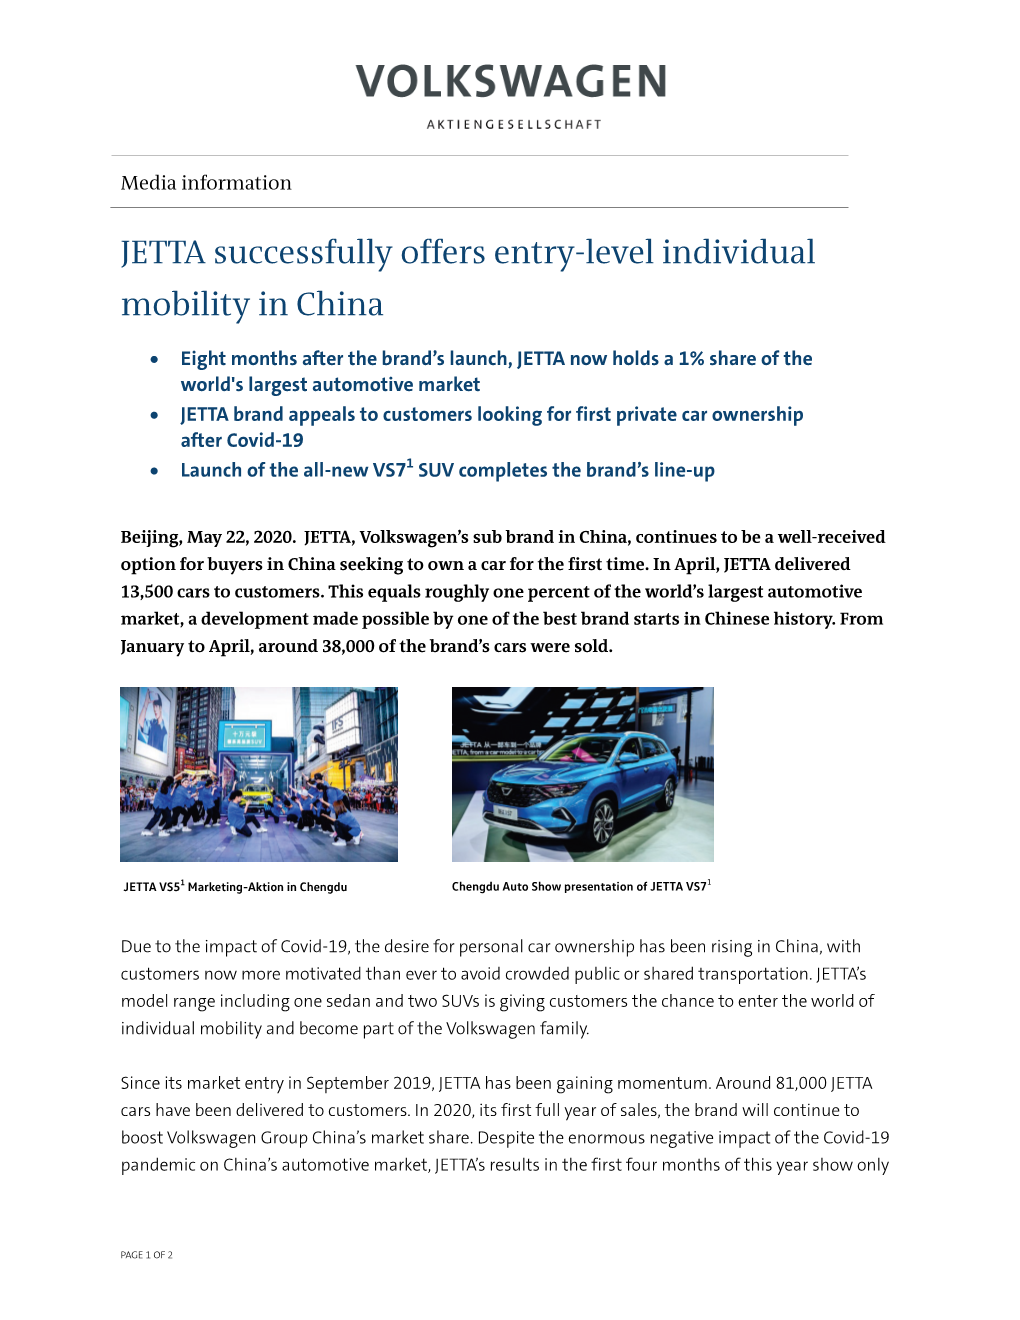 JETTA Successfully Offers Entry-Level Individual Mobility in China